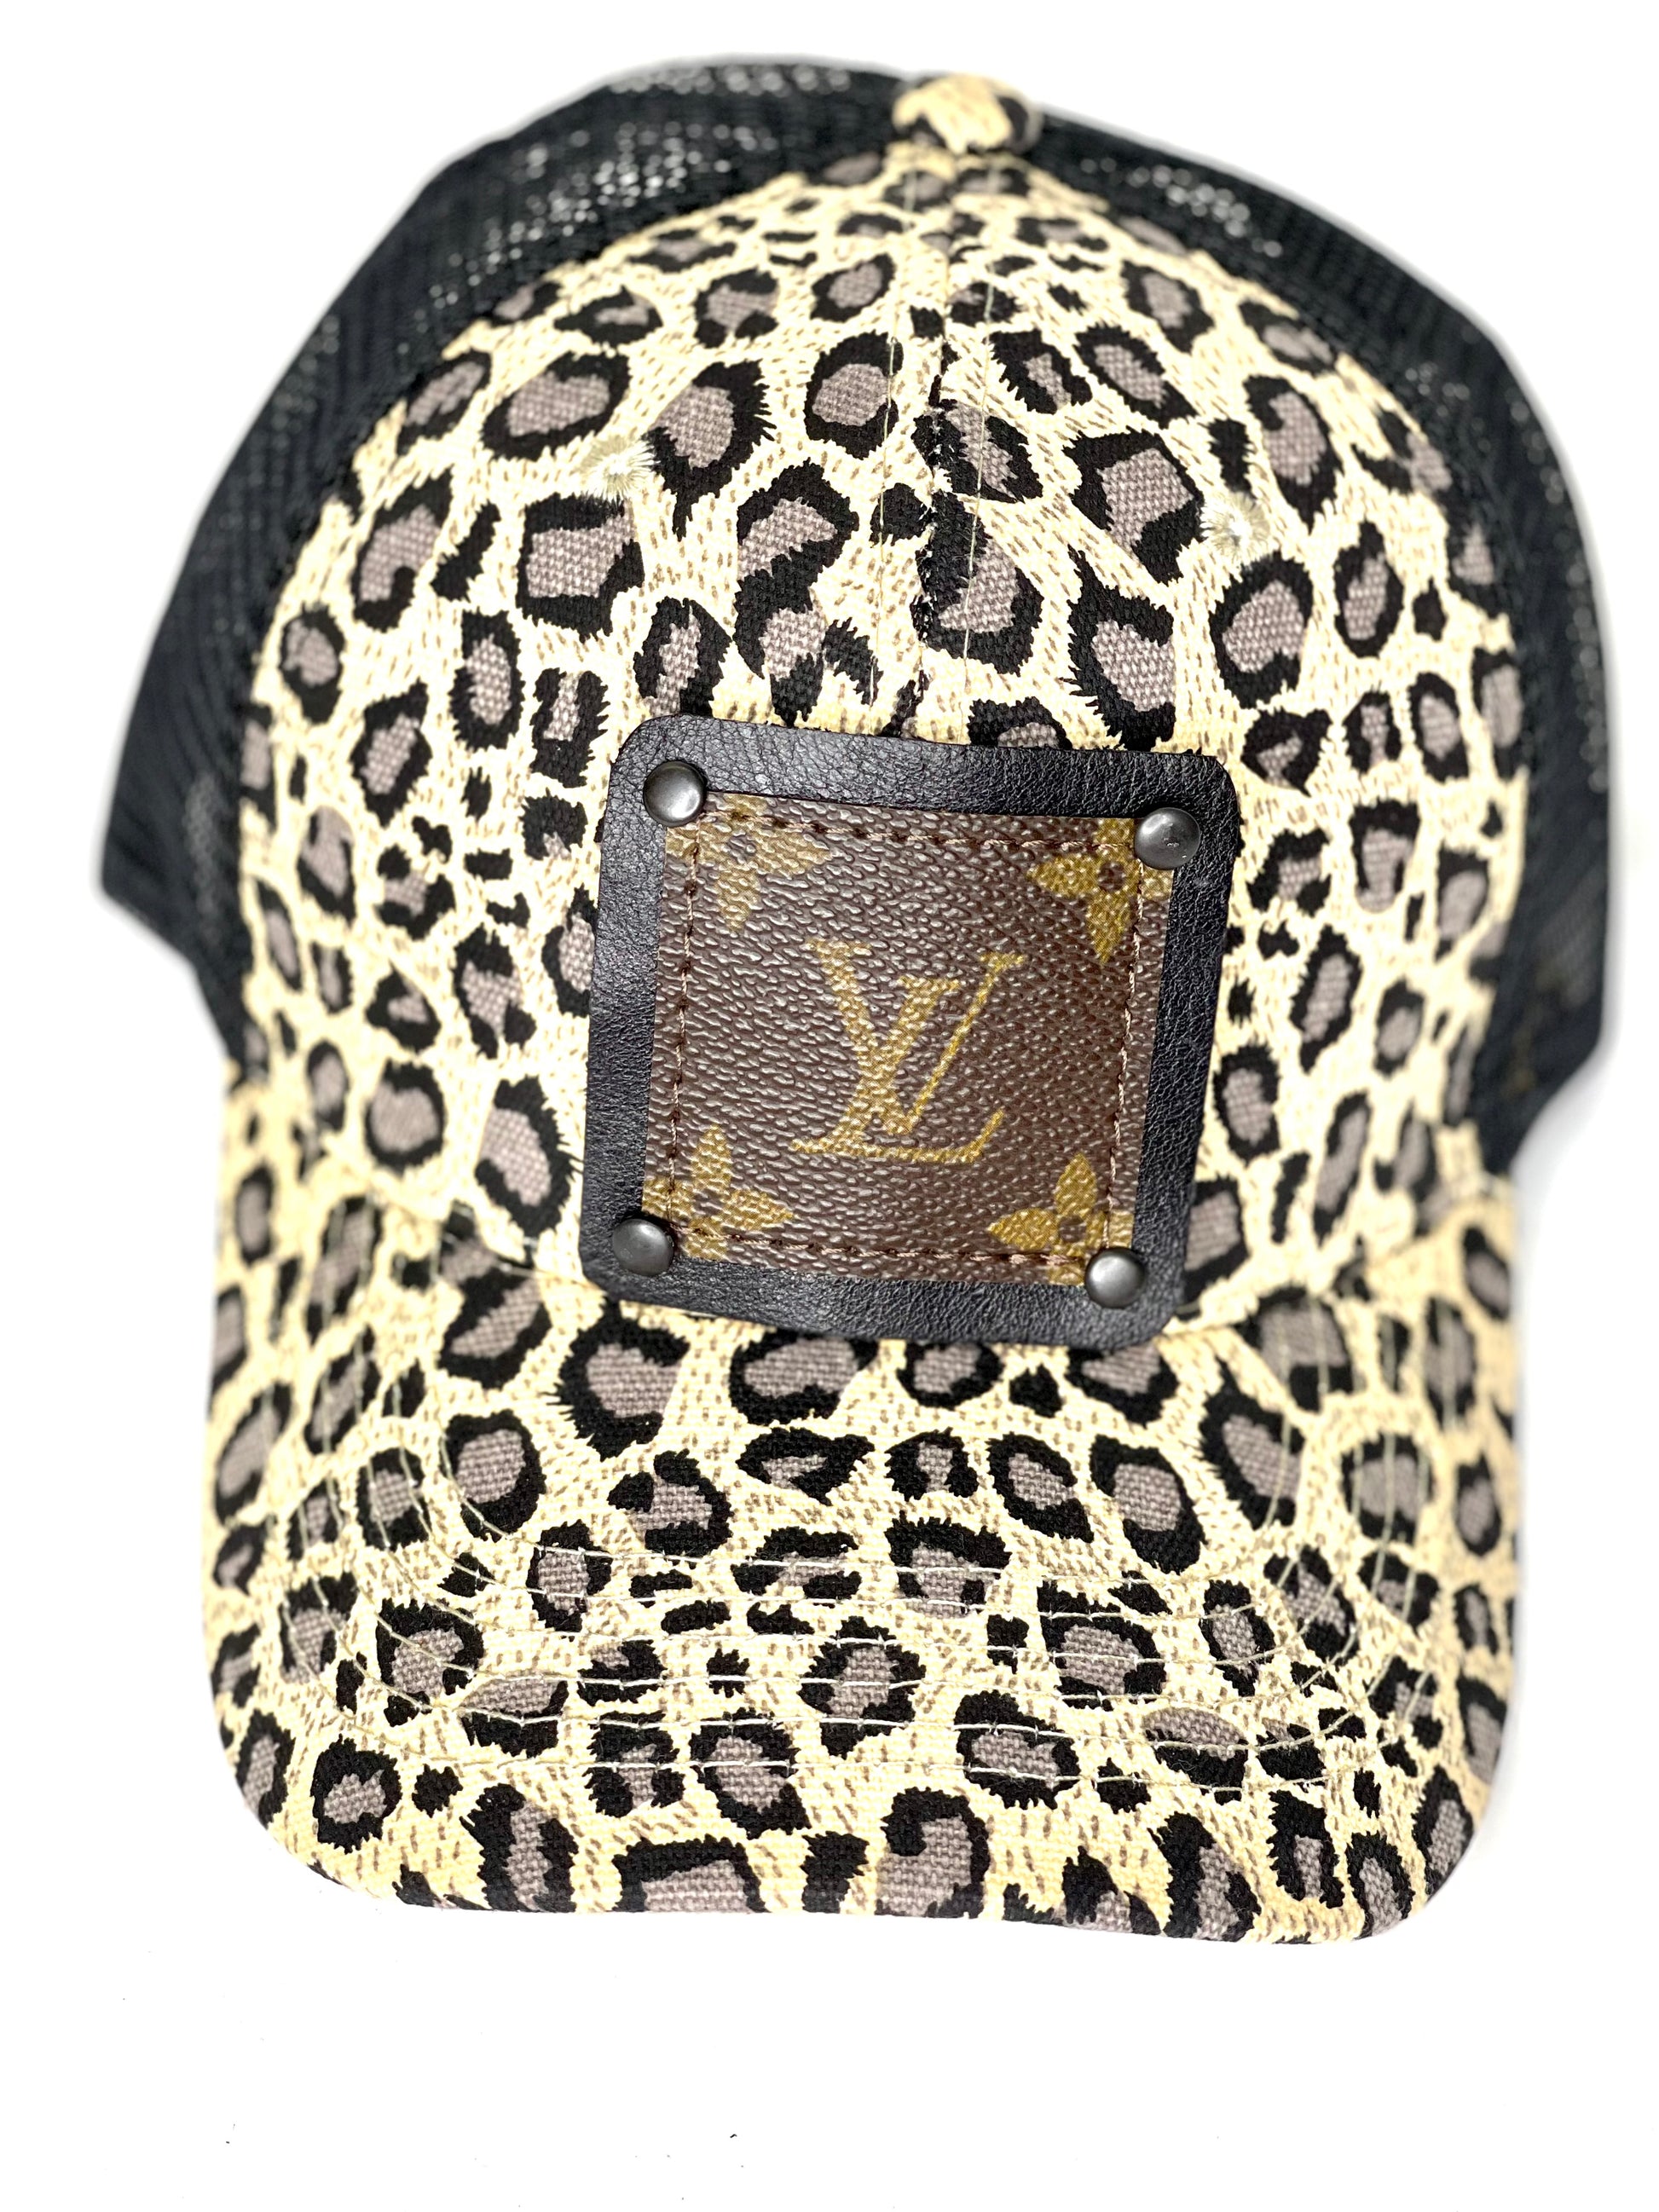 G2 - Cream Leopard Trucker Hat Black Mesh Black/Black - Patches Of Upcycling